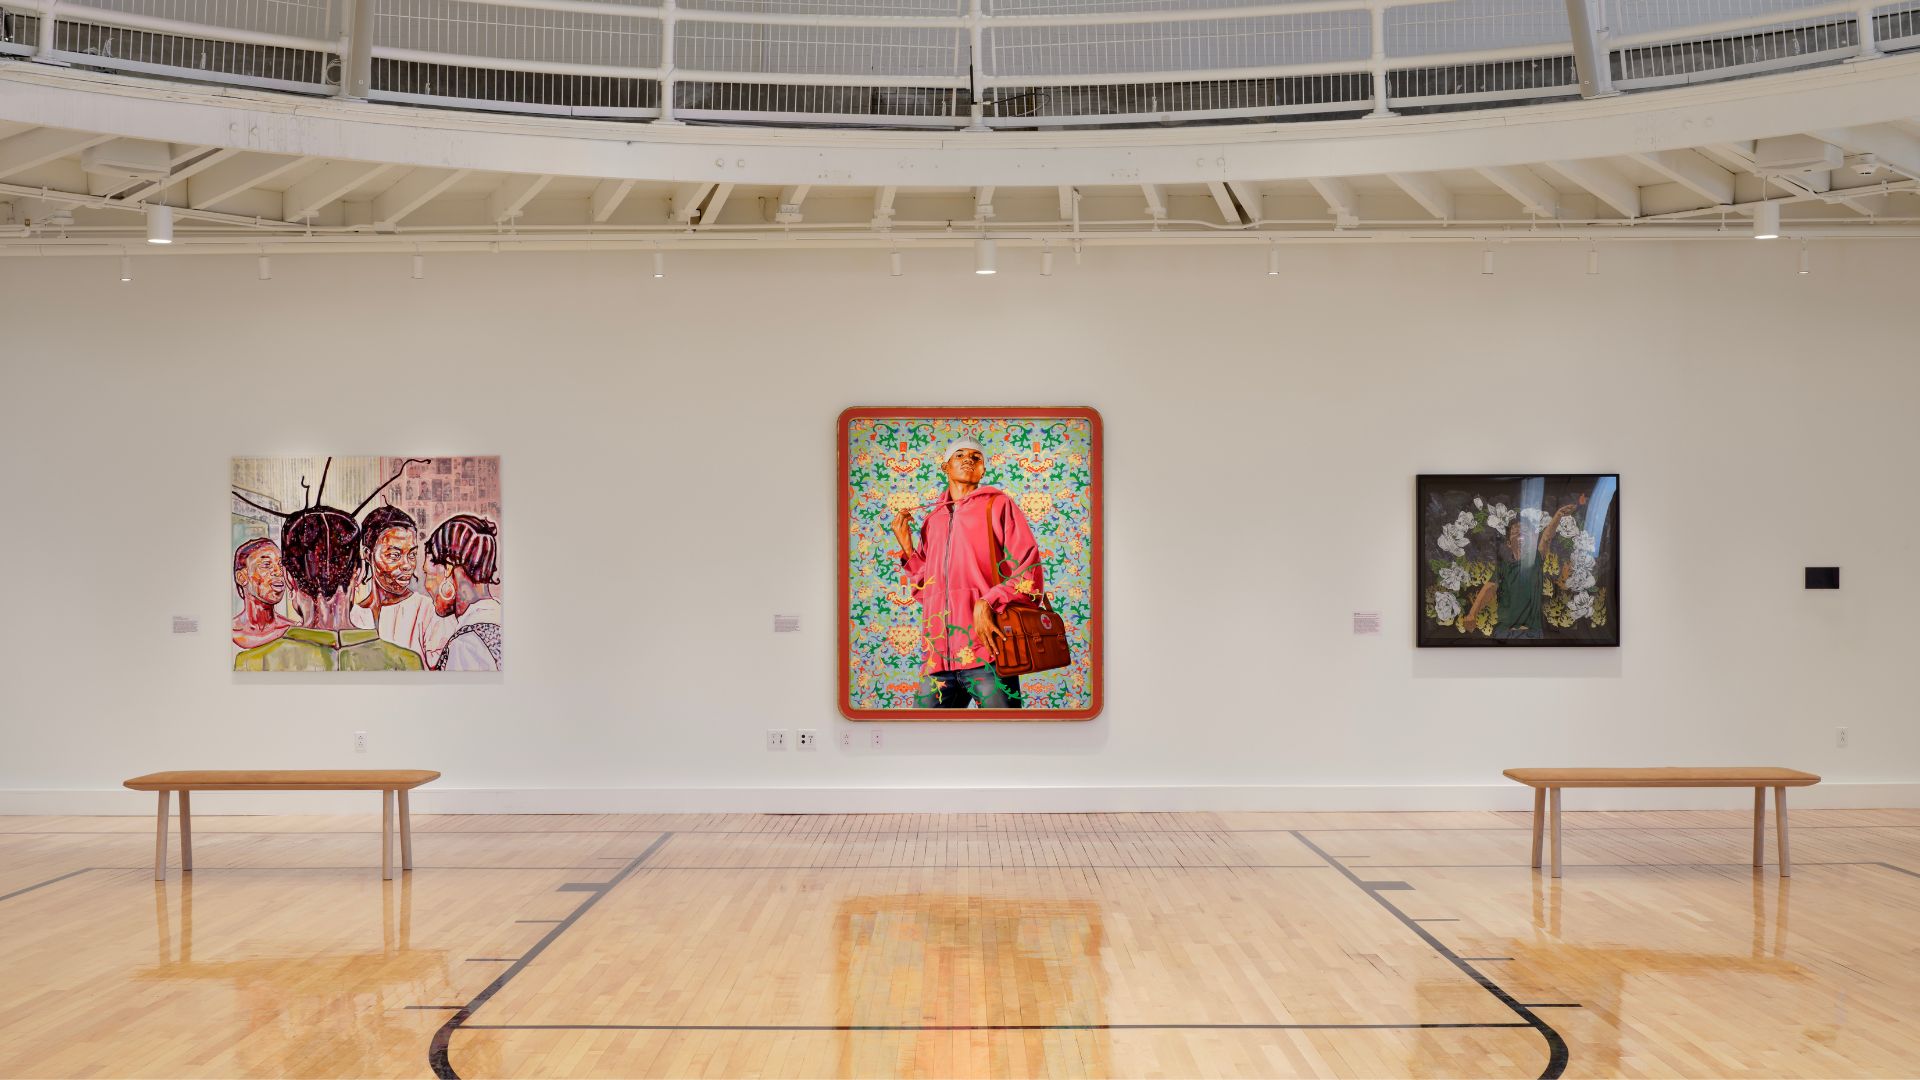 The basketball court and indoor running track of the YMCA has been turned into an art gallery at 21c Museum Hotel St. Louis.